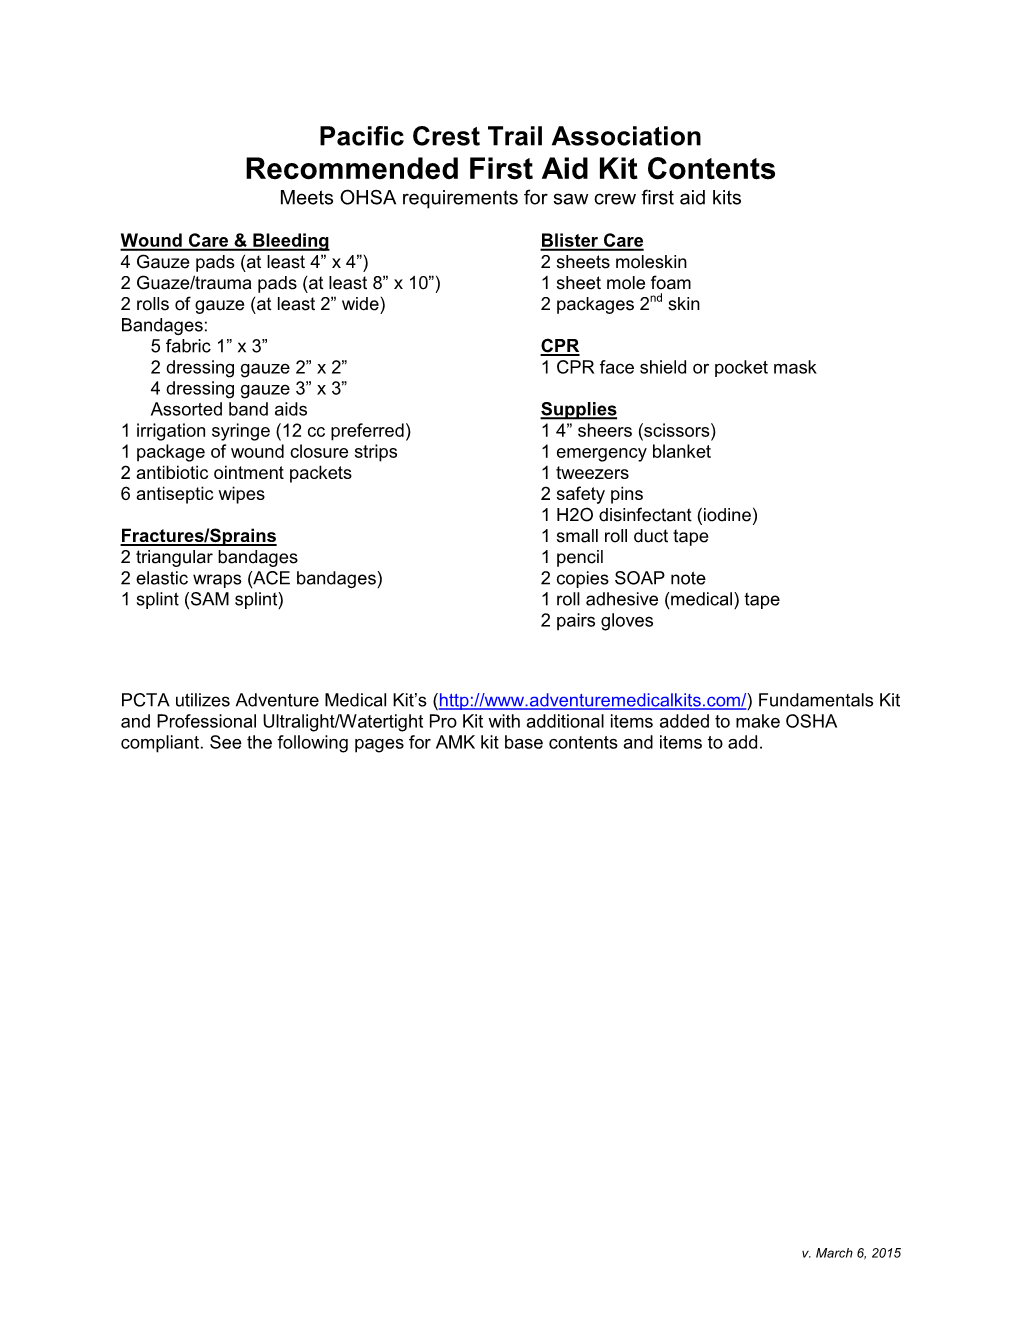 Recommended First Aid Kit Contents Meets OHSA Requirements for Saw Crew First Aid Kits